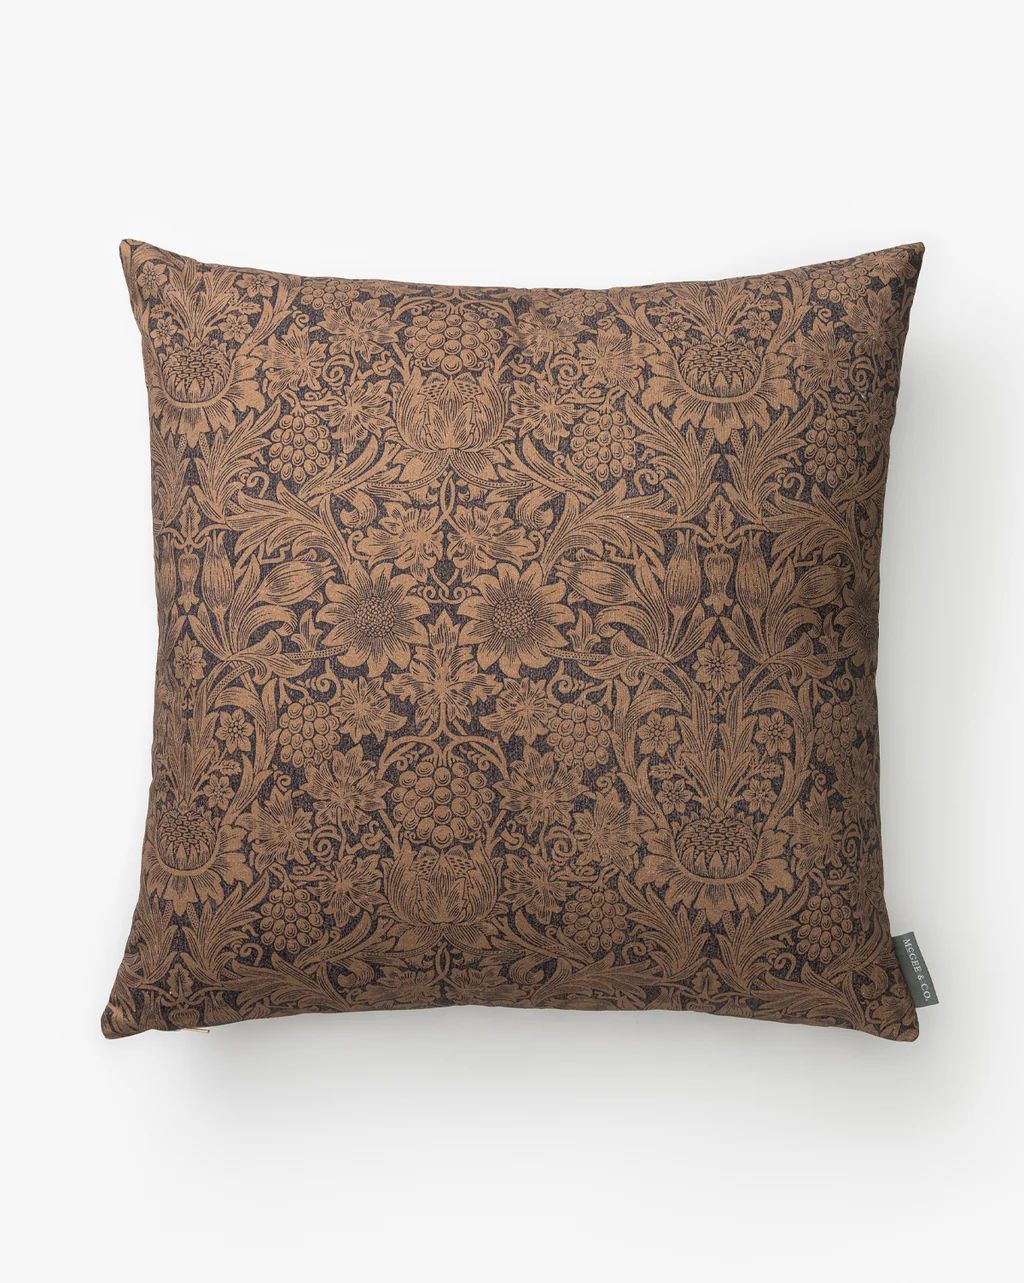 Morris & Co. x McGee & Co. Sunflower Pillow Cover | McGee & Co.